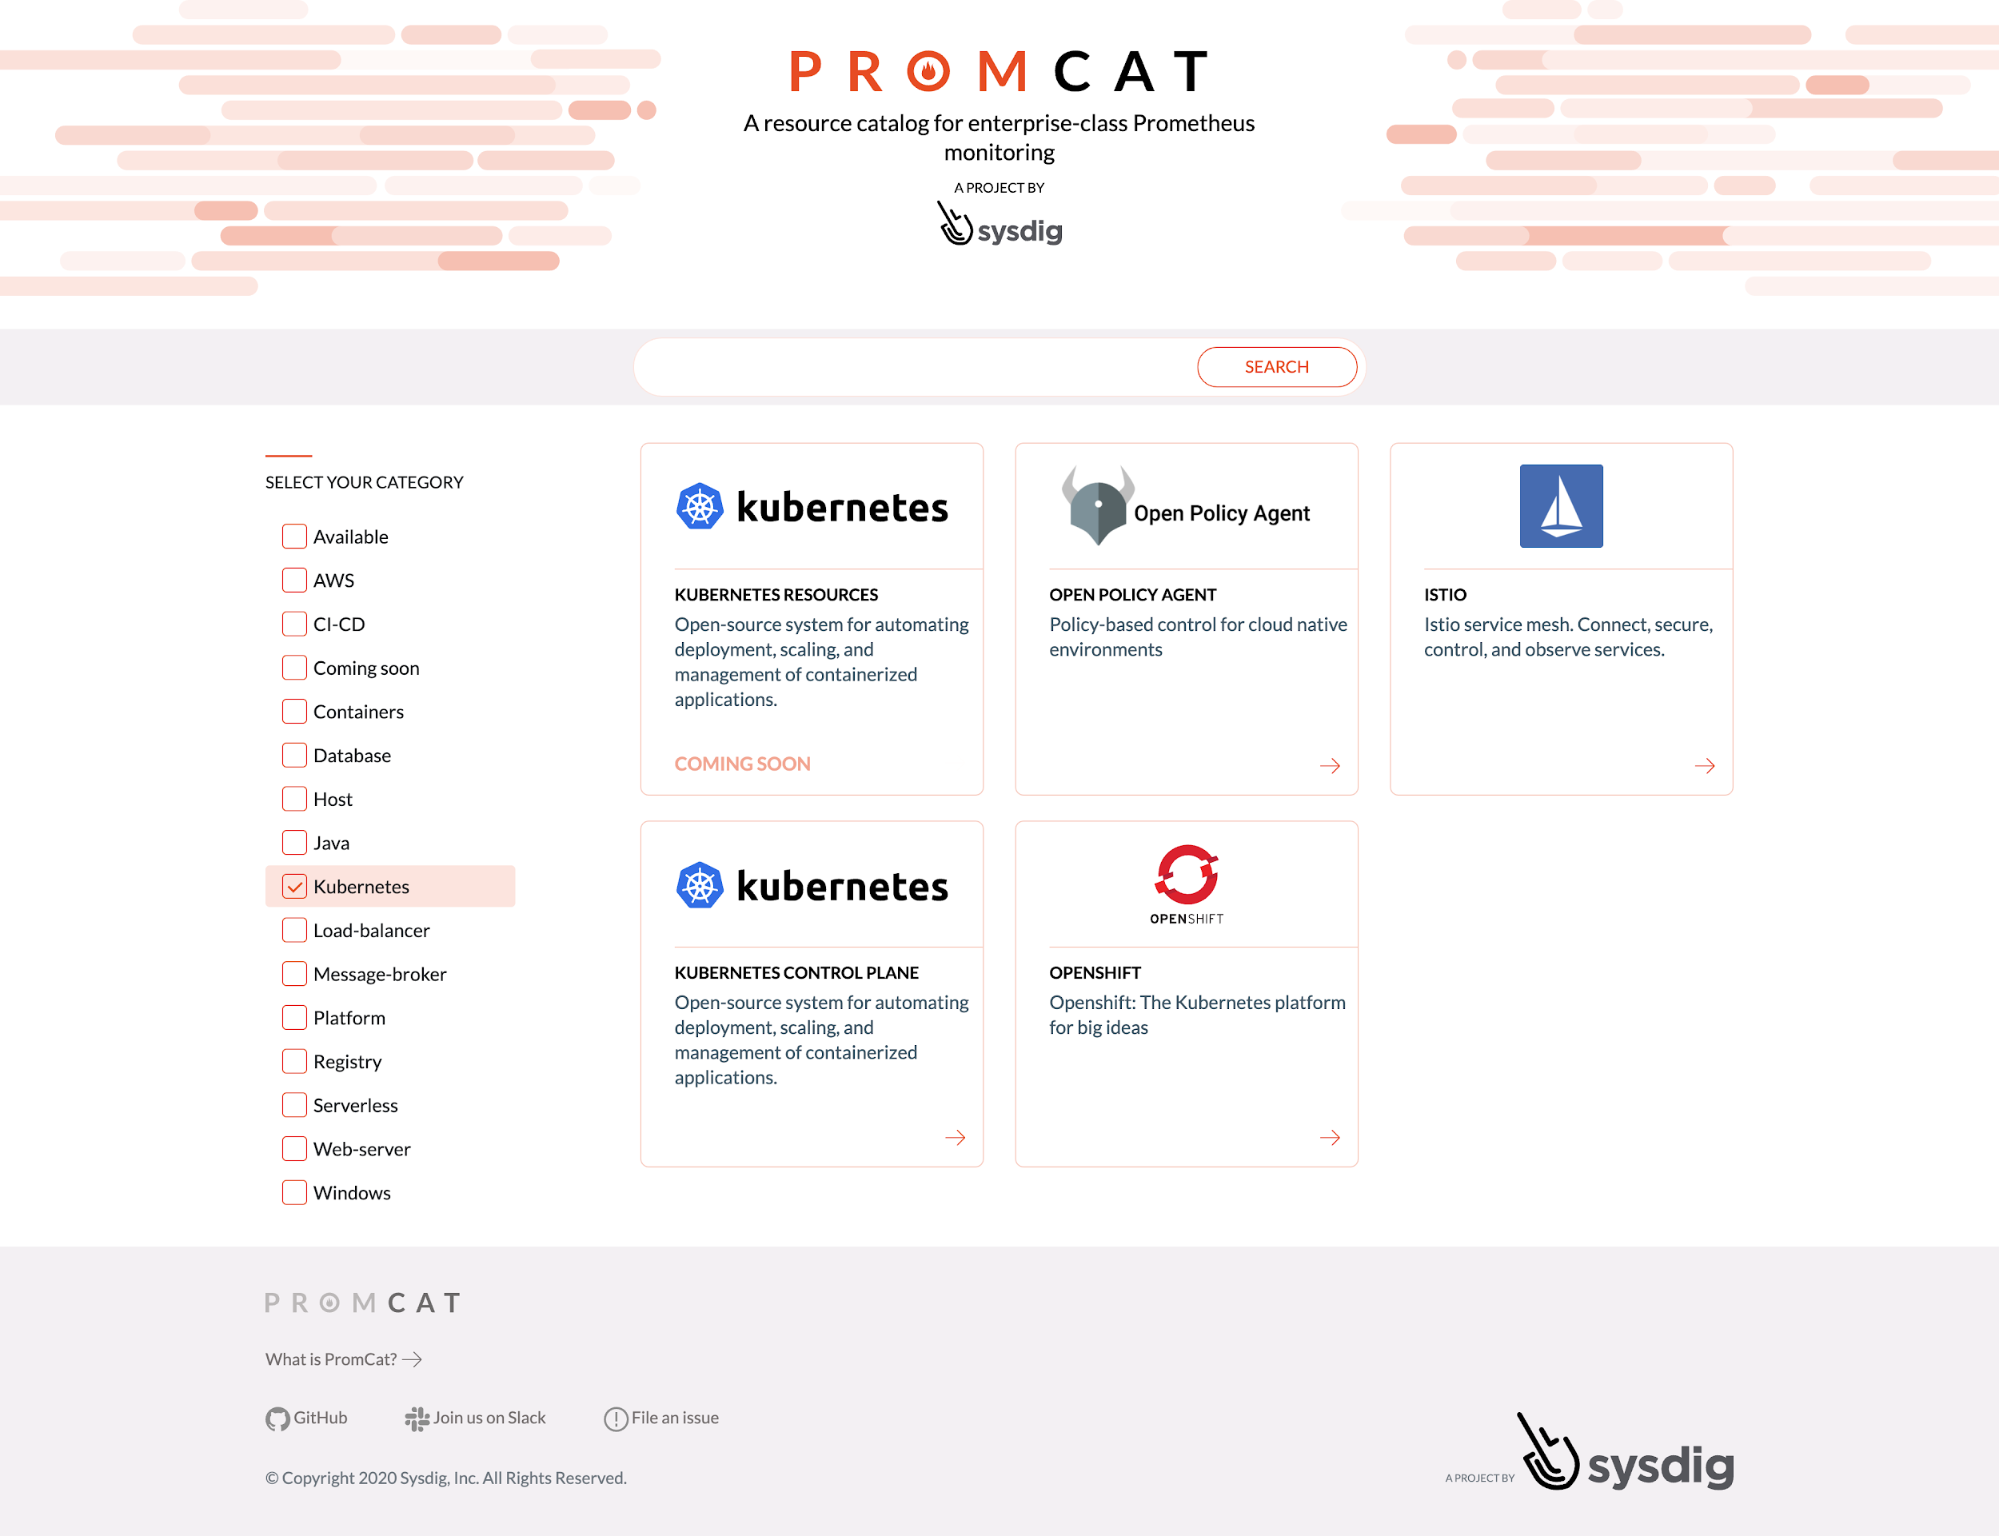 Promcat contains resources on how to monitor Istio